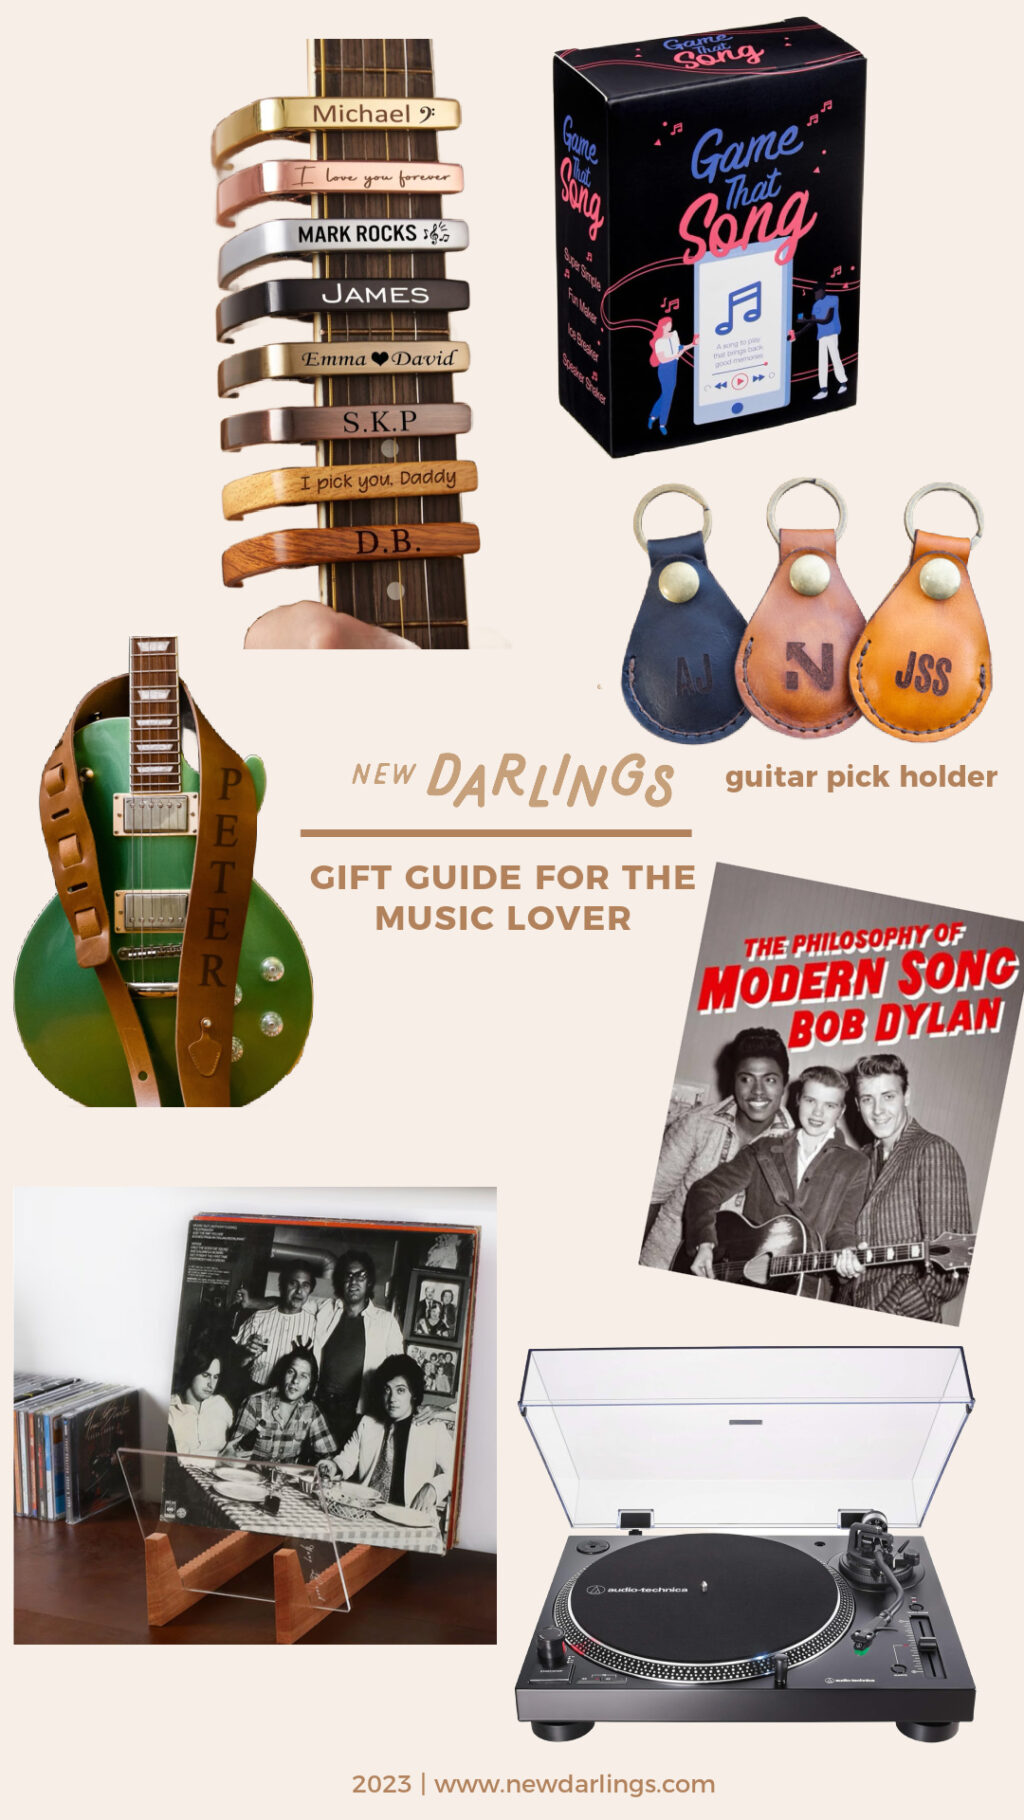 gift ideas for husbands, personalized capo, guitar pick gift ideas, the best record player